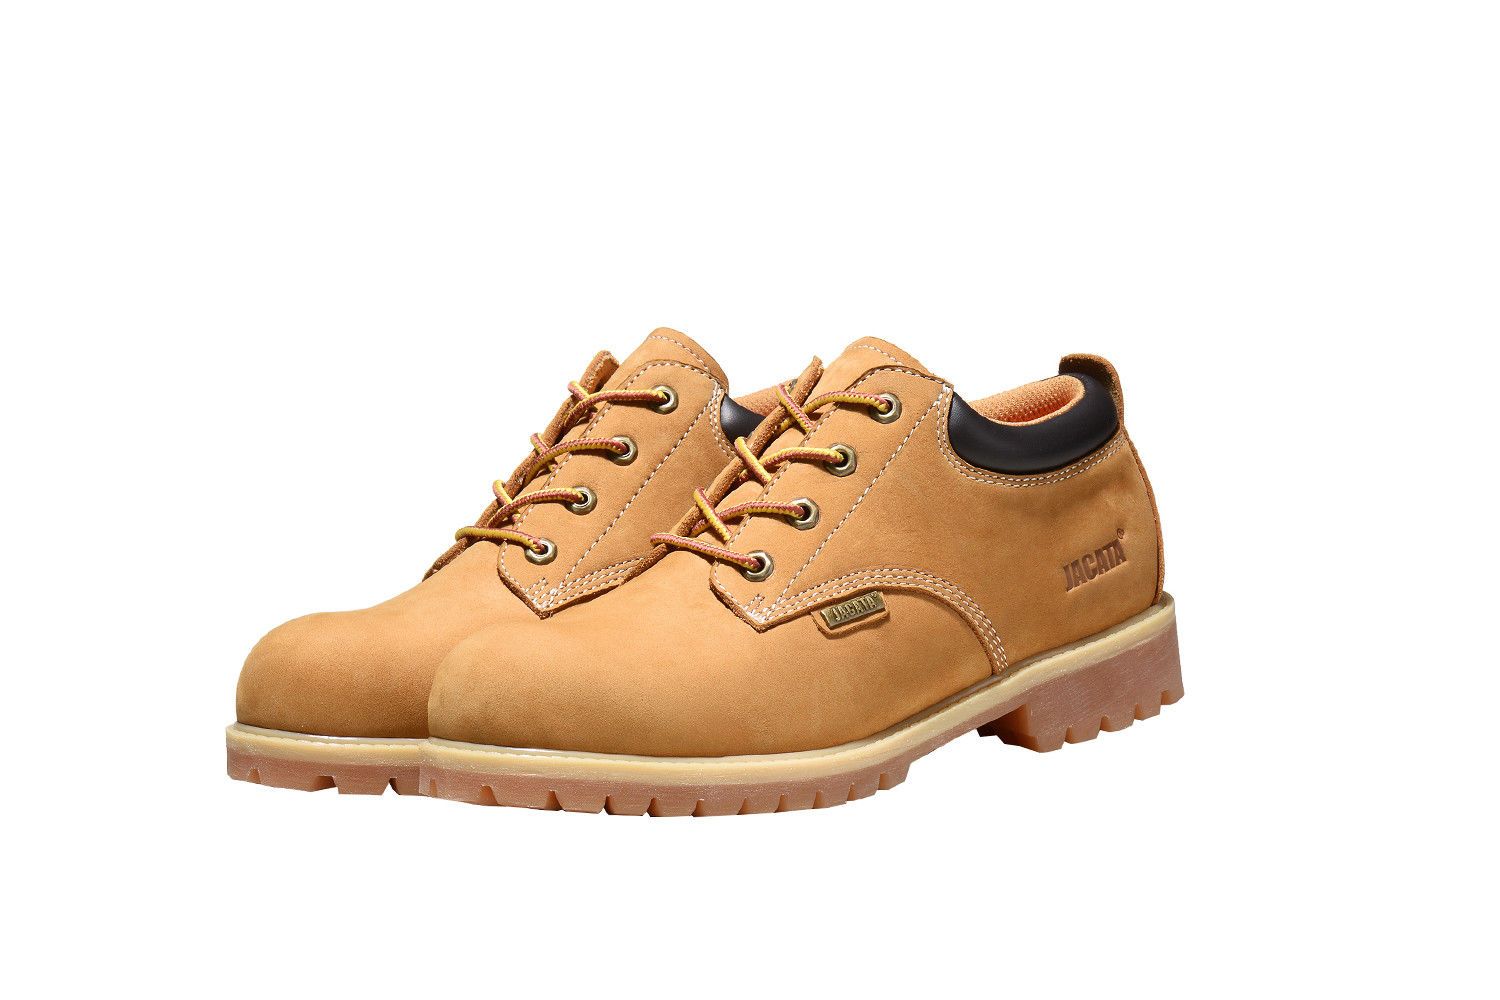 mens low top work boots